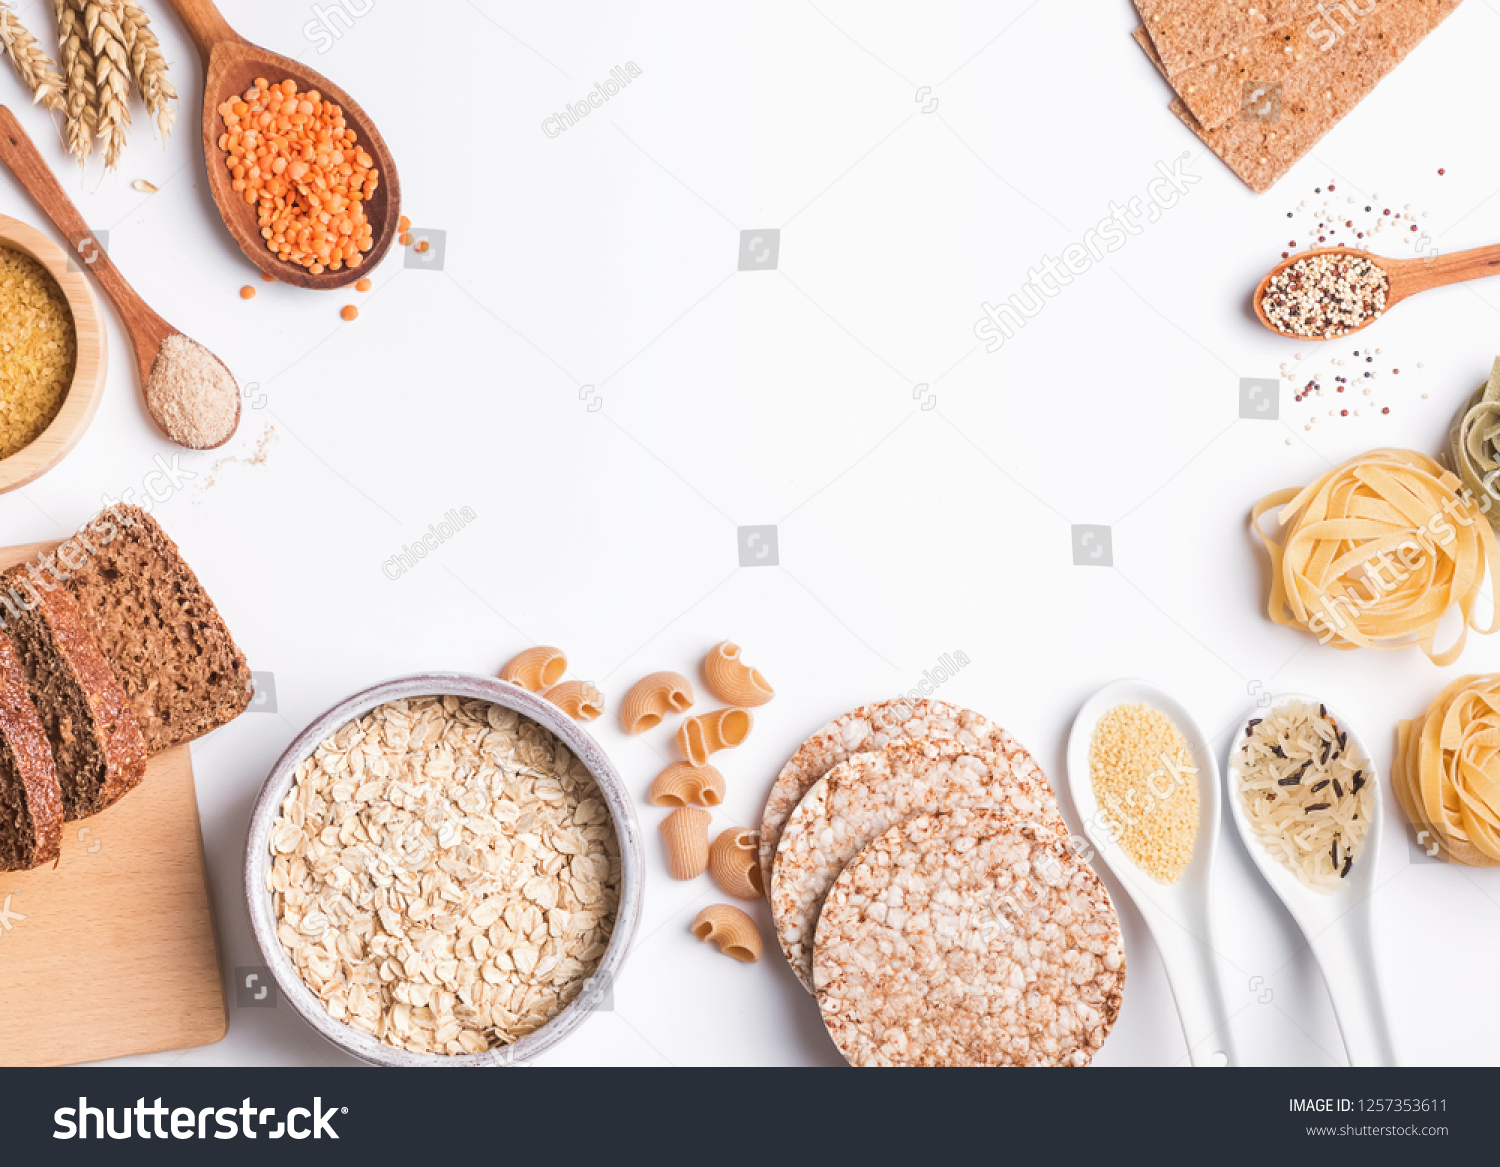 Different types of high carbohydrate food. Flour, bread, dry pasta and lentils and other ingredients on the white background. #1257353611